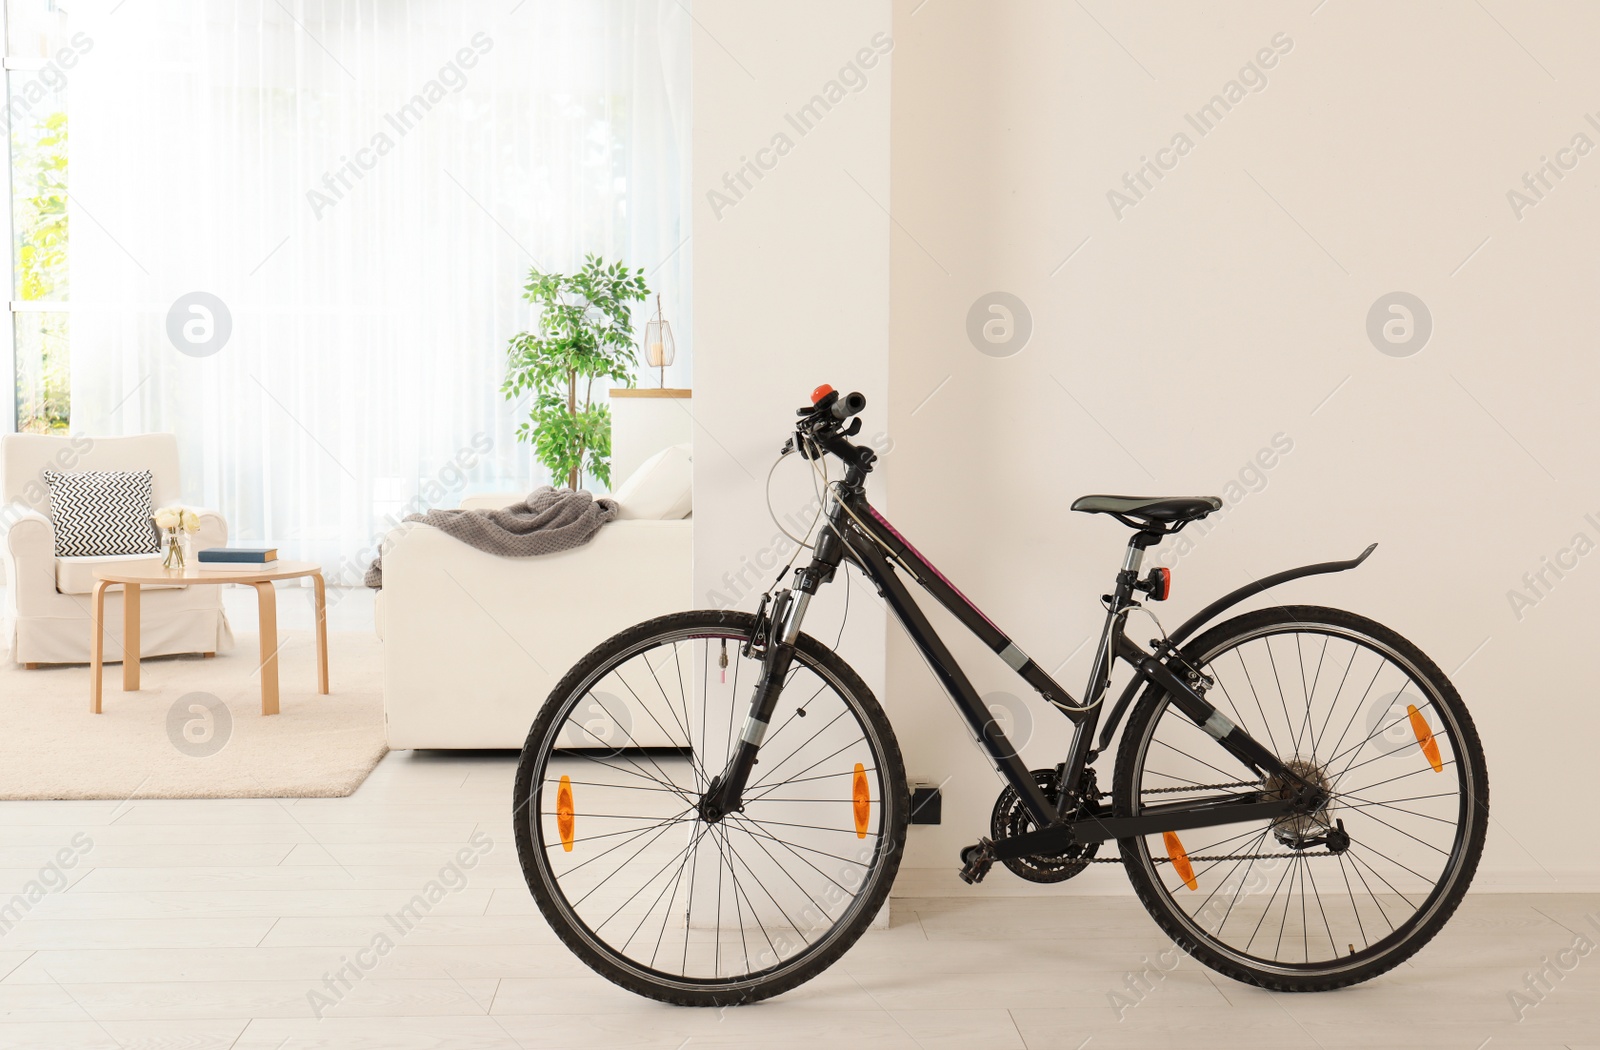 Photo of Bicycle near light wall in stylish room interior